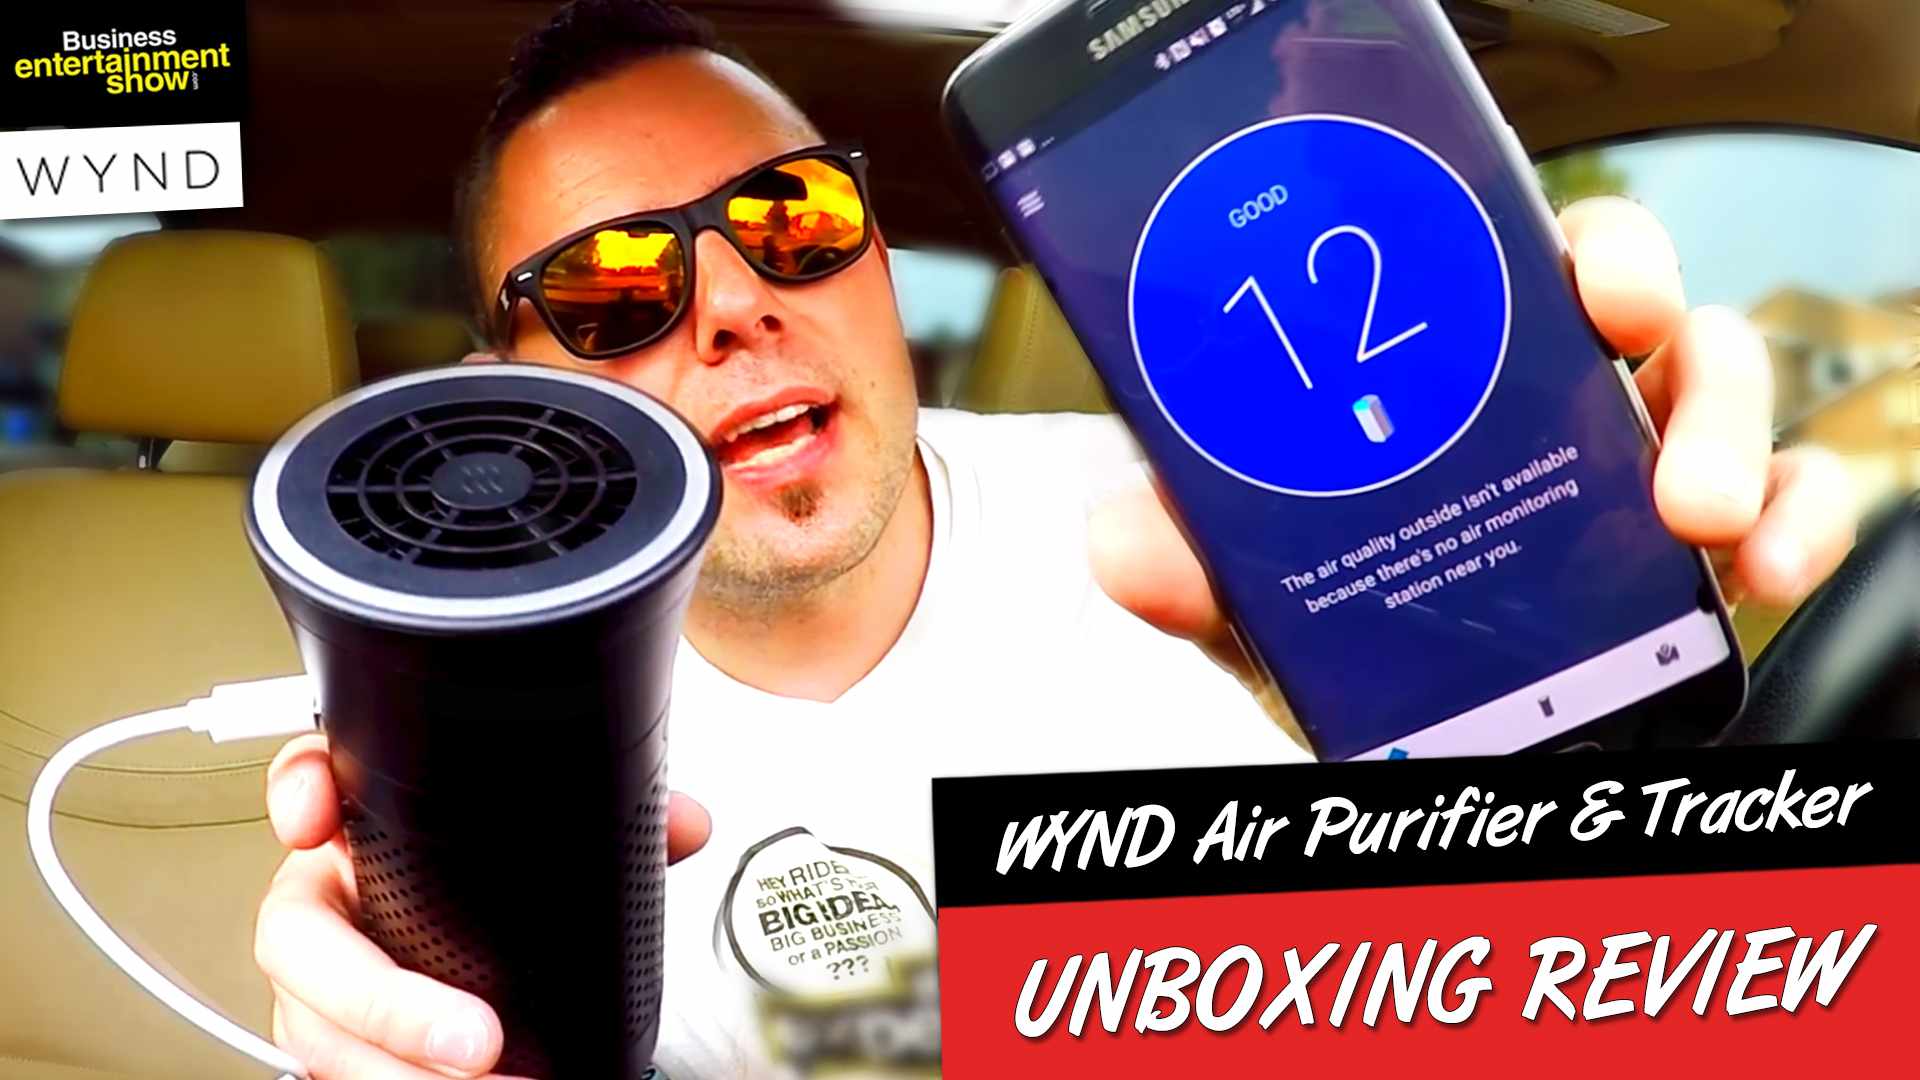 WYND Air Purifier & Air Tracker Unboxing & In-Depth Review - IS IT REALLY AS GOOD AS THEY CLAIM?